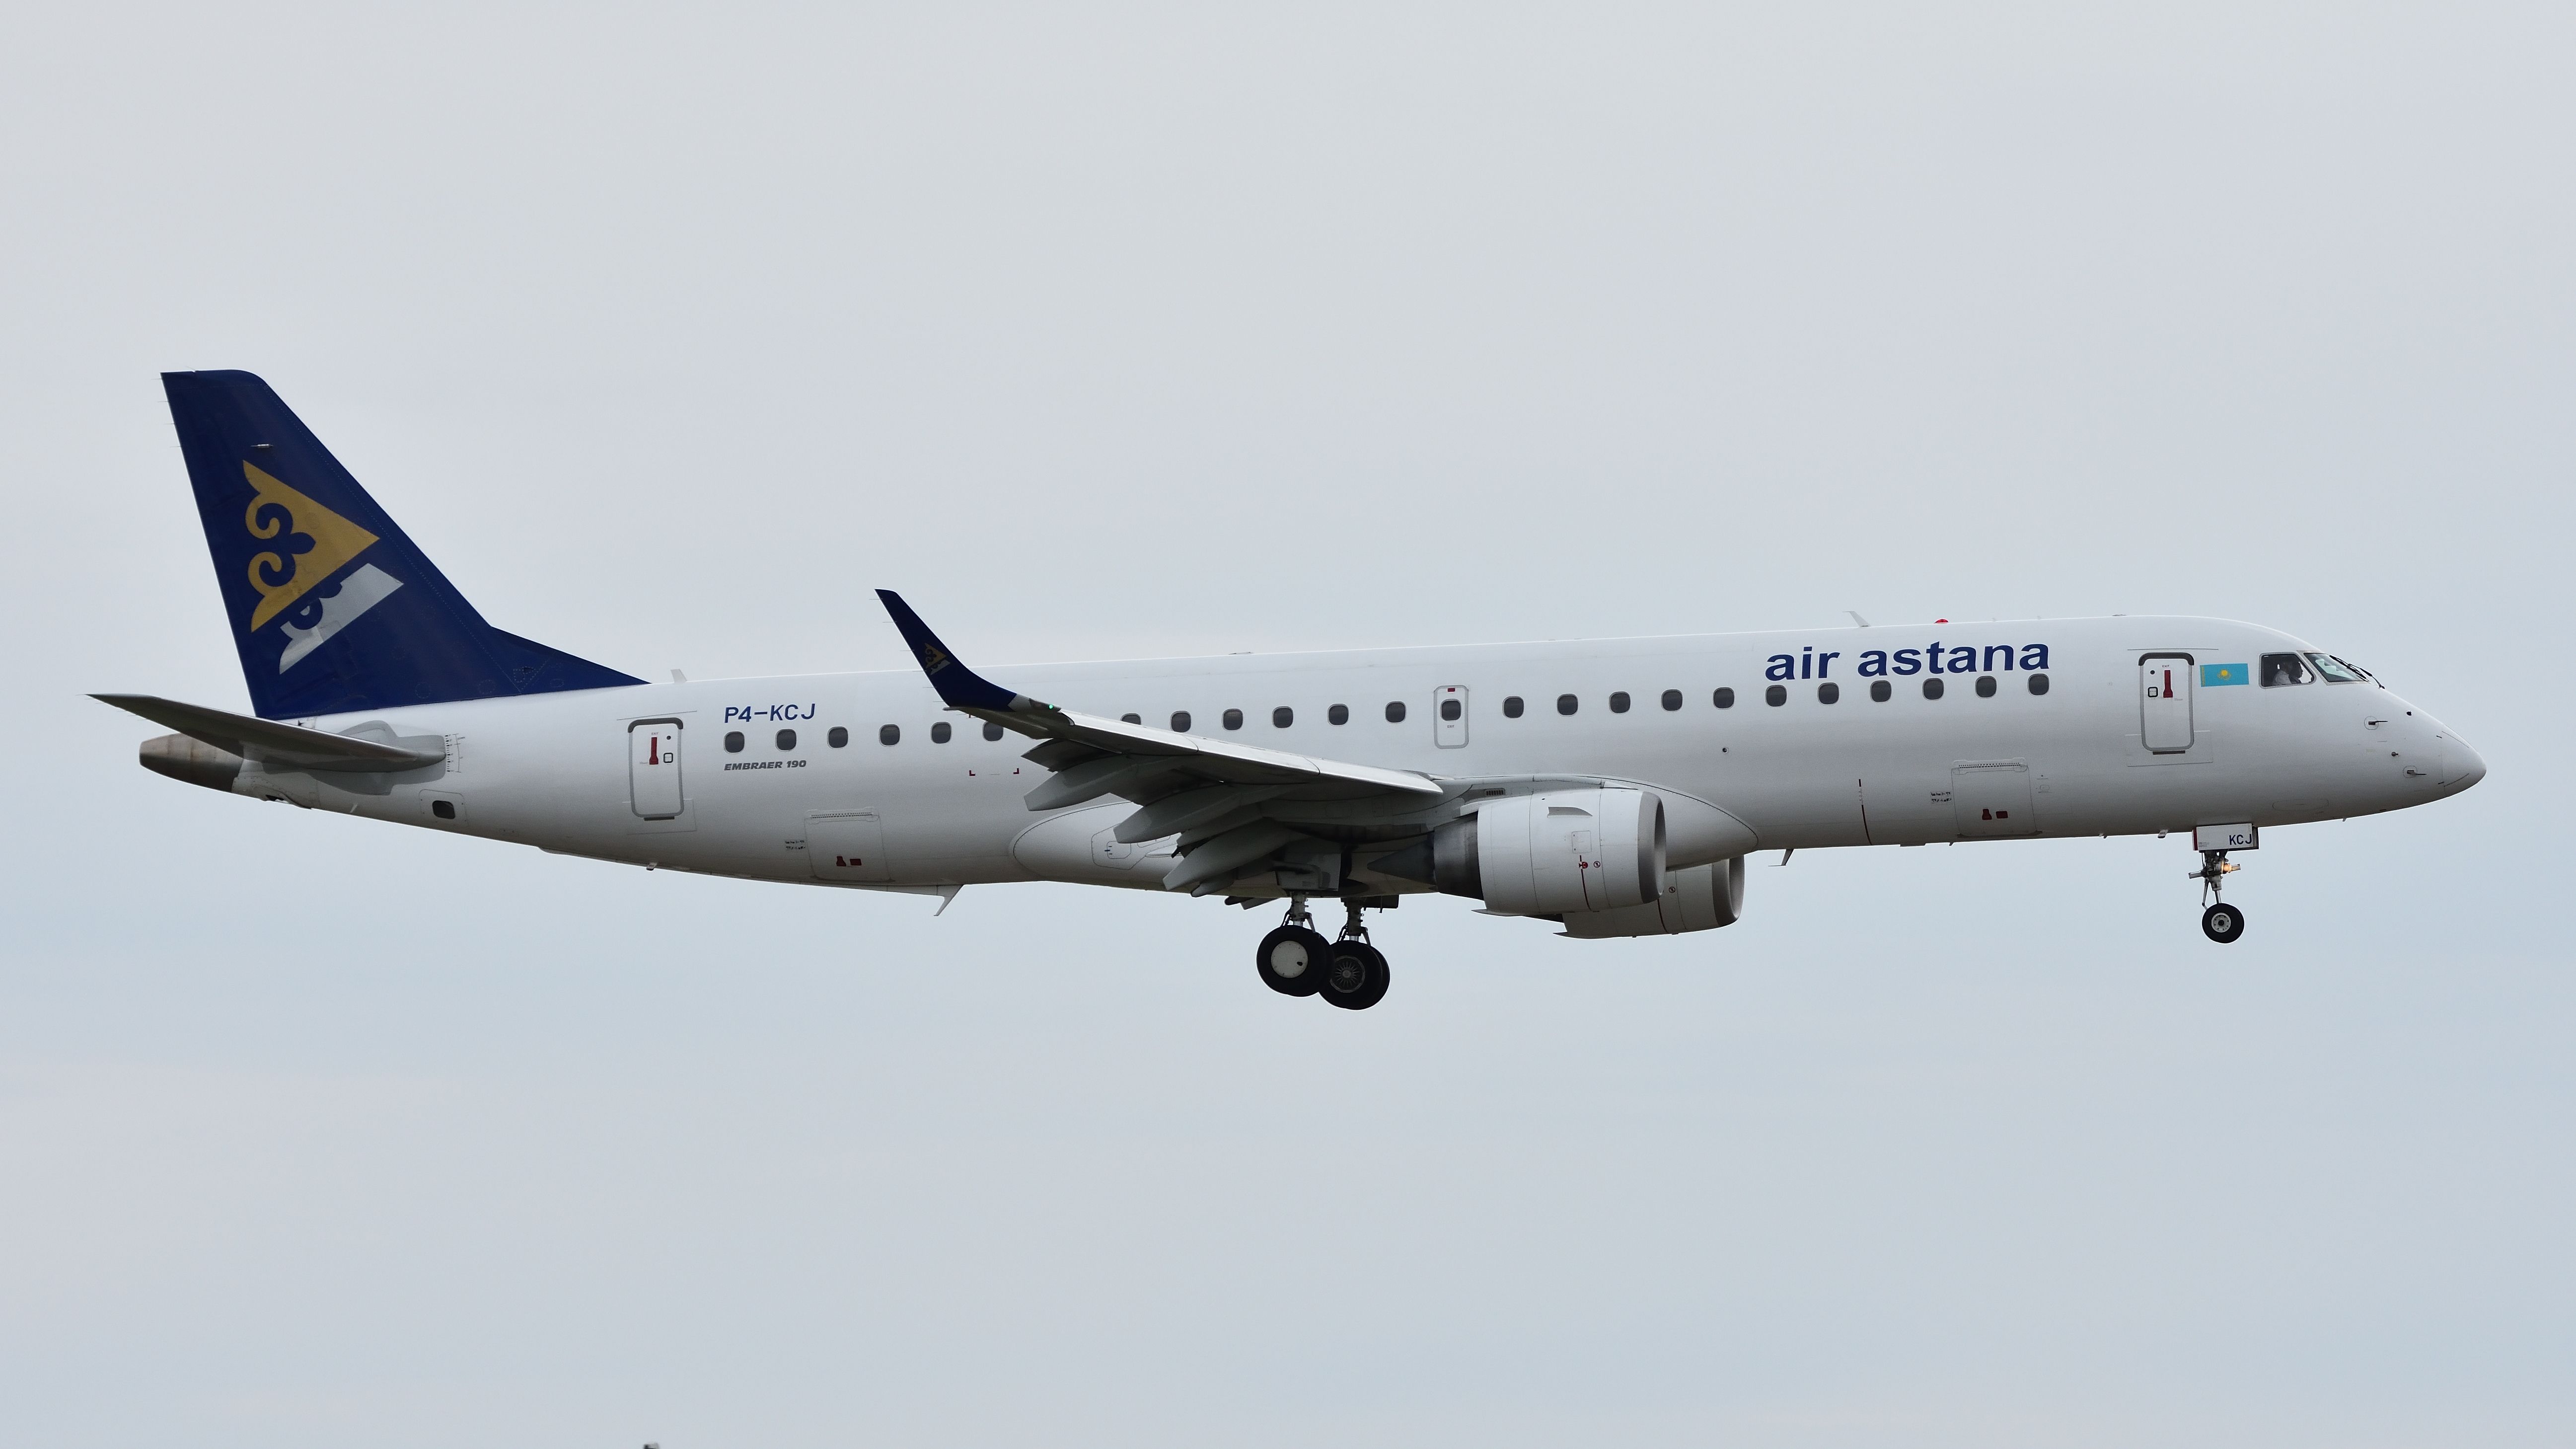 How A Maintenance Error Caused Severe Control Issues Onboard Air Astana